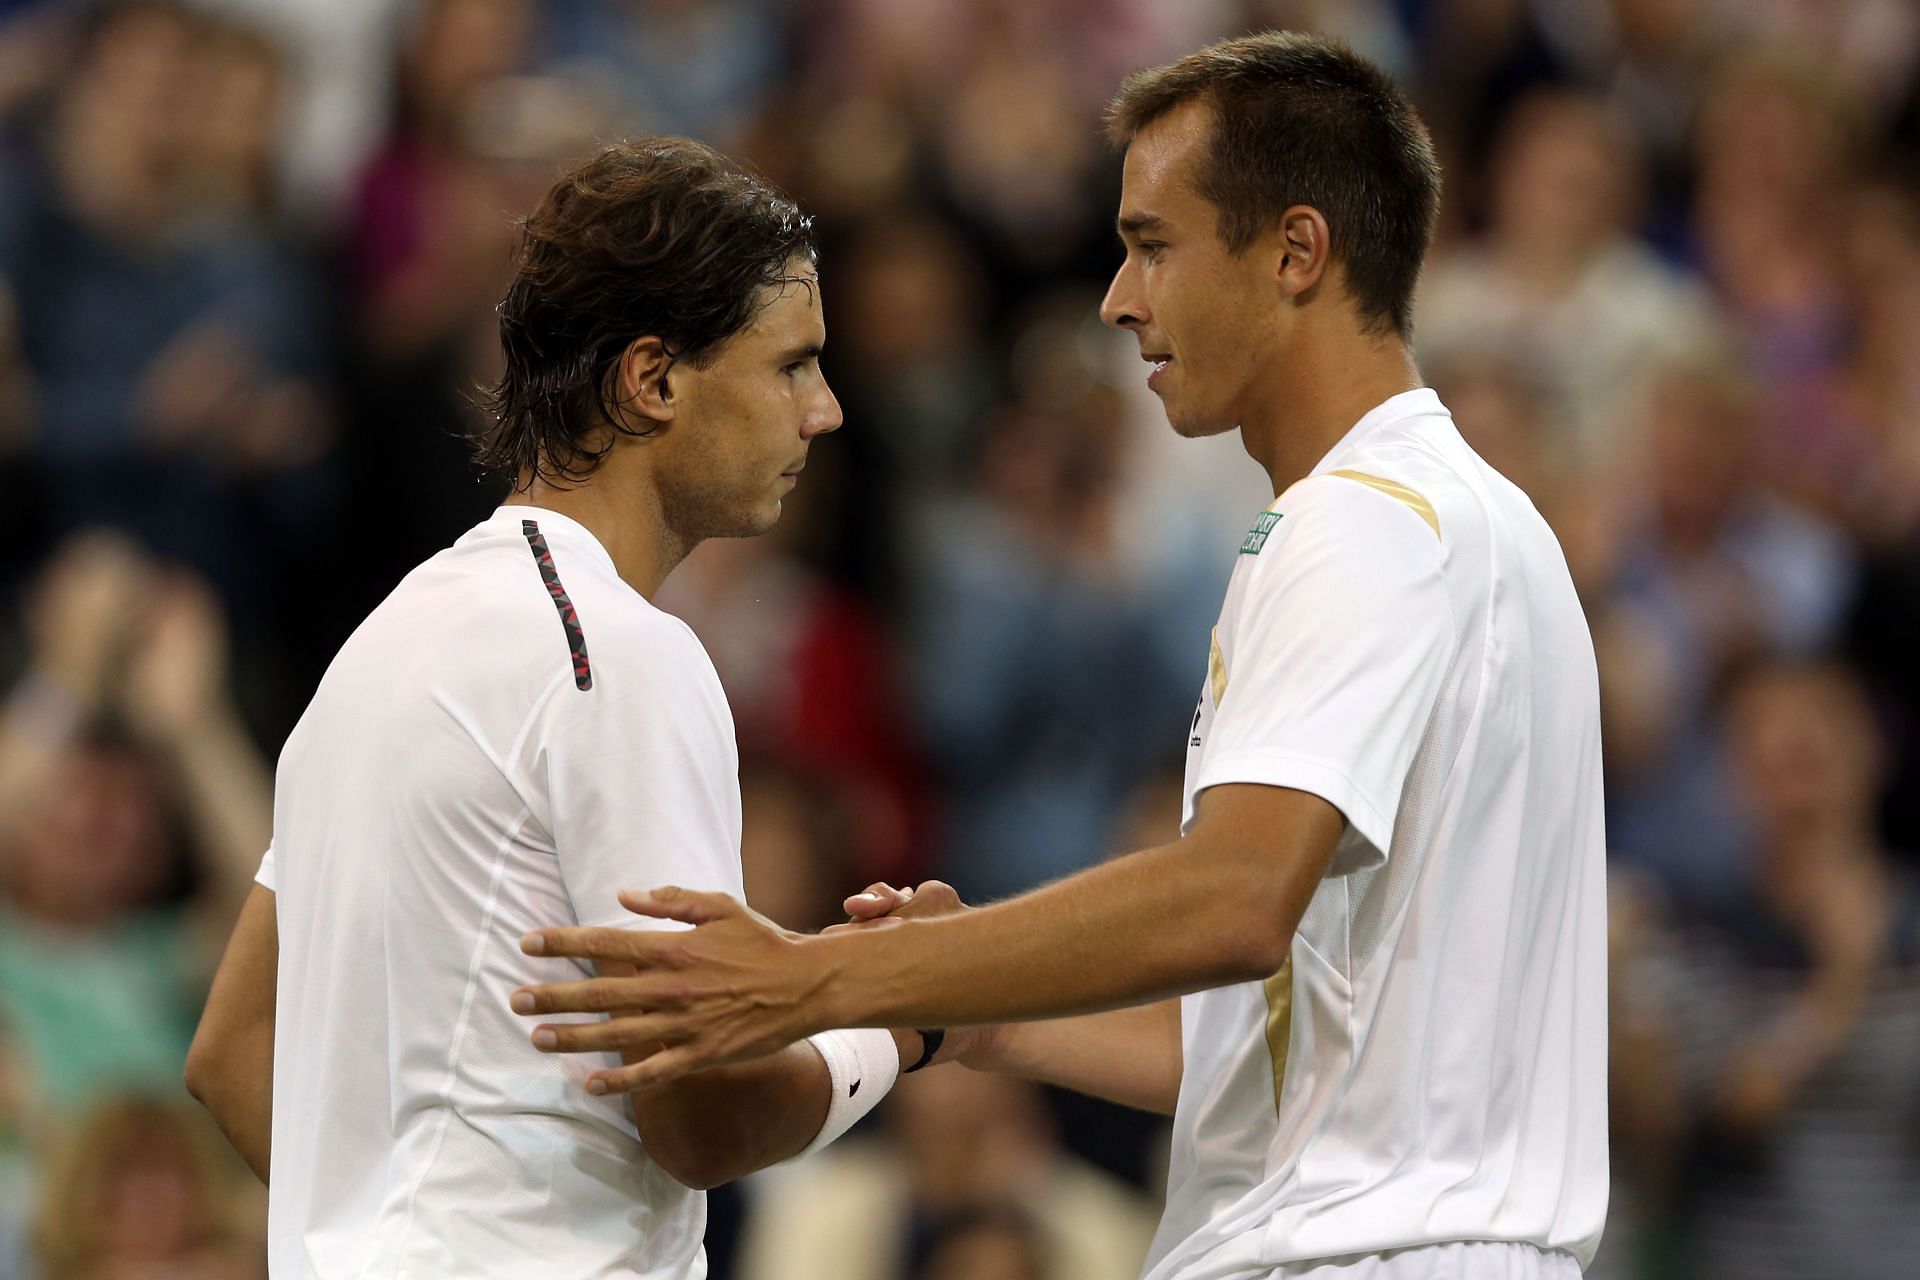 Rafael Nadal and Lukas Rosol after their Wimbledon 2012 clash